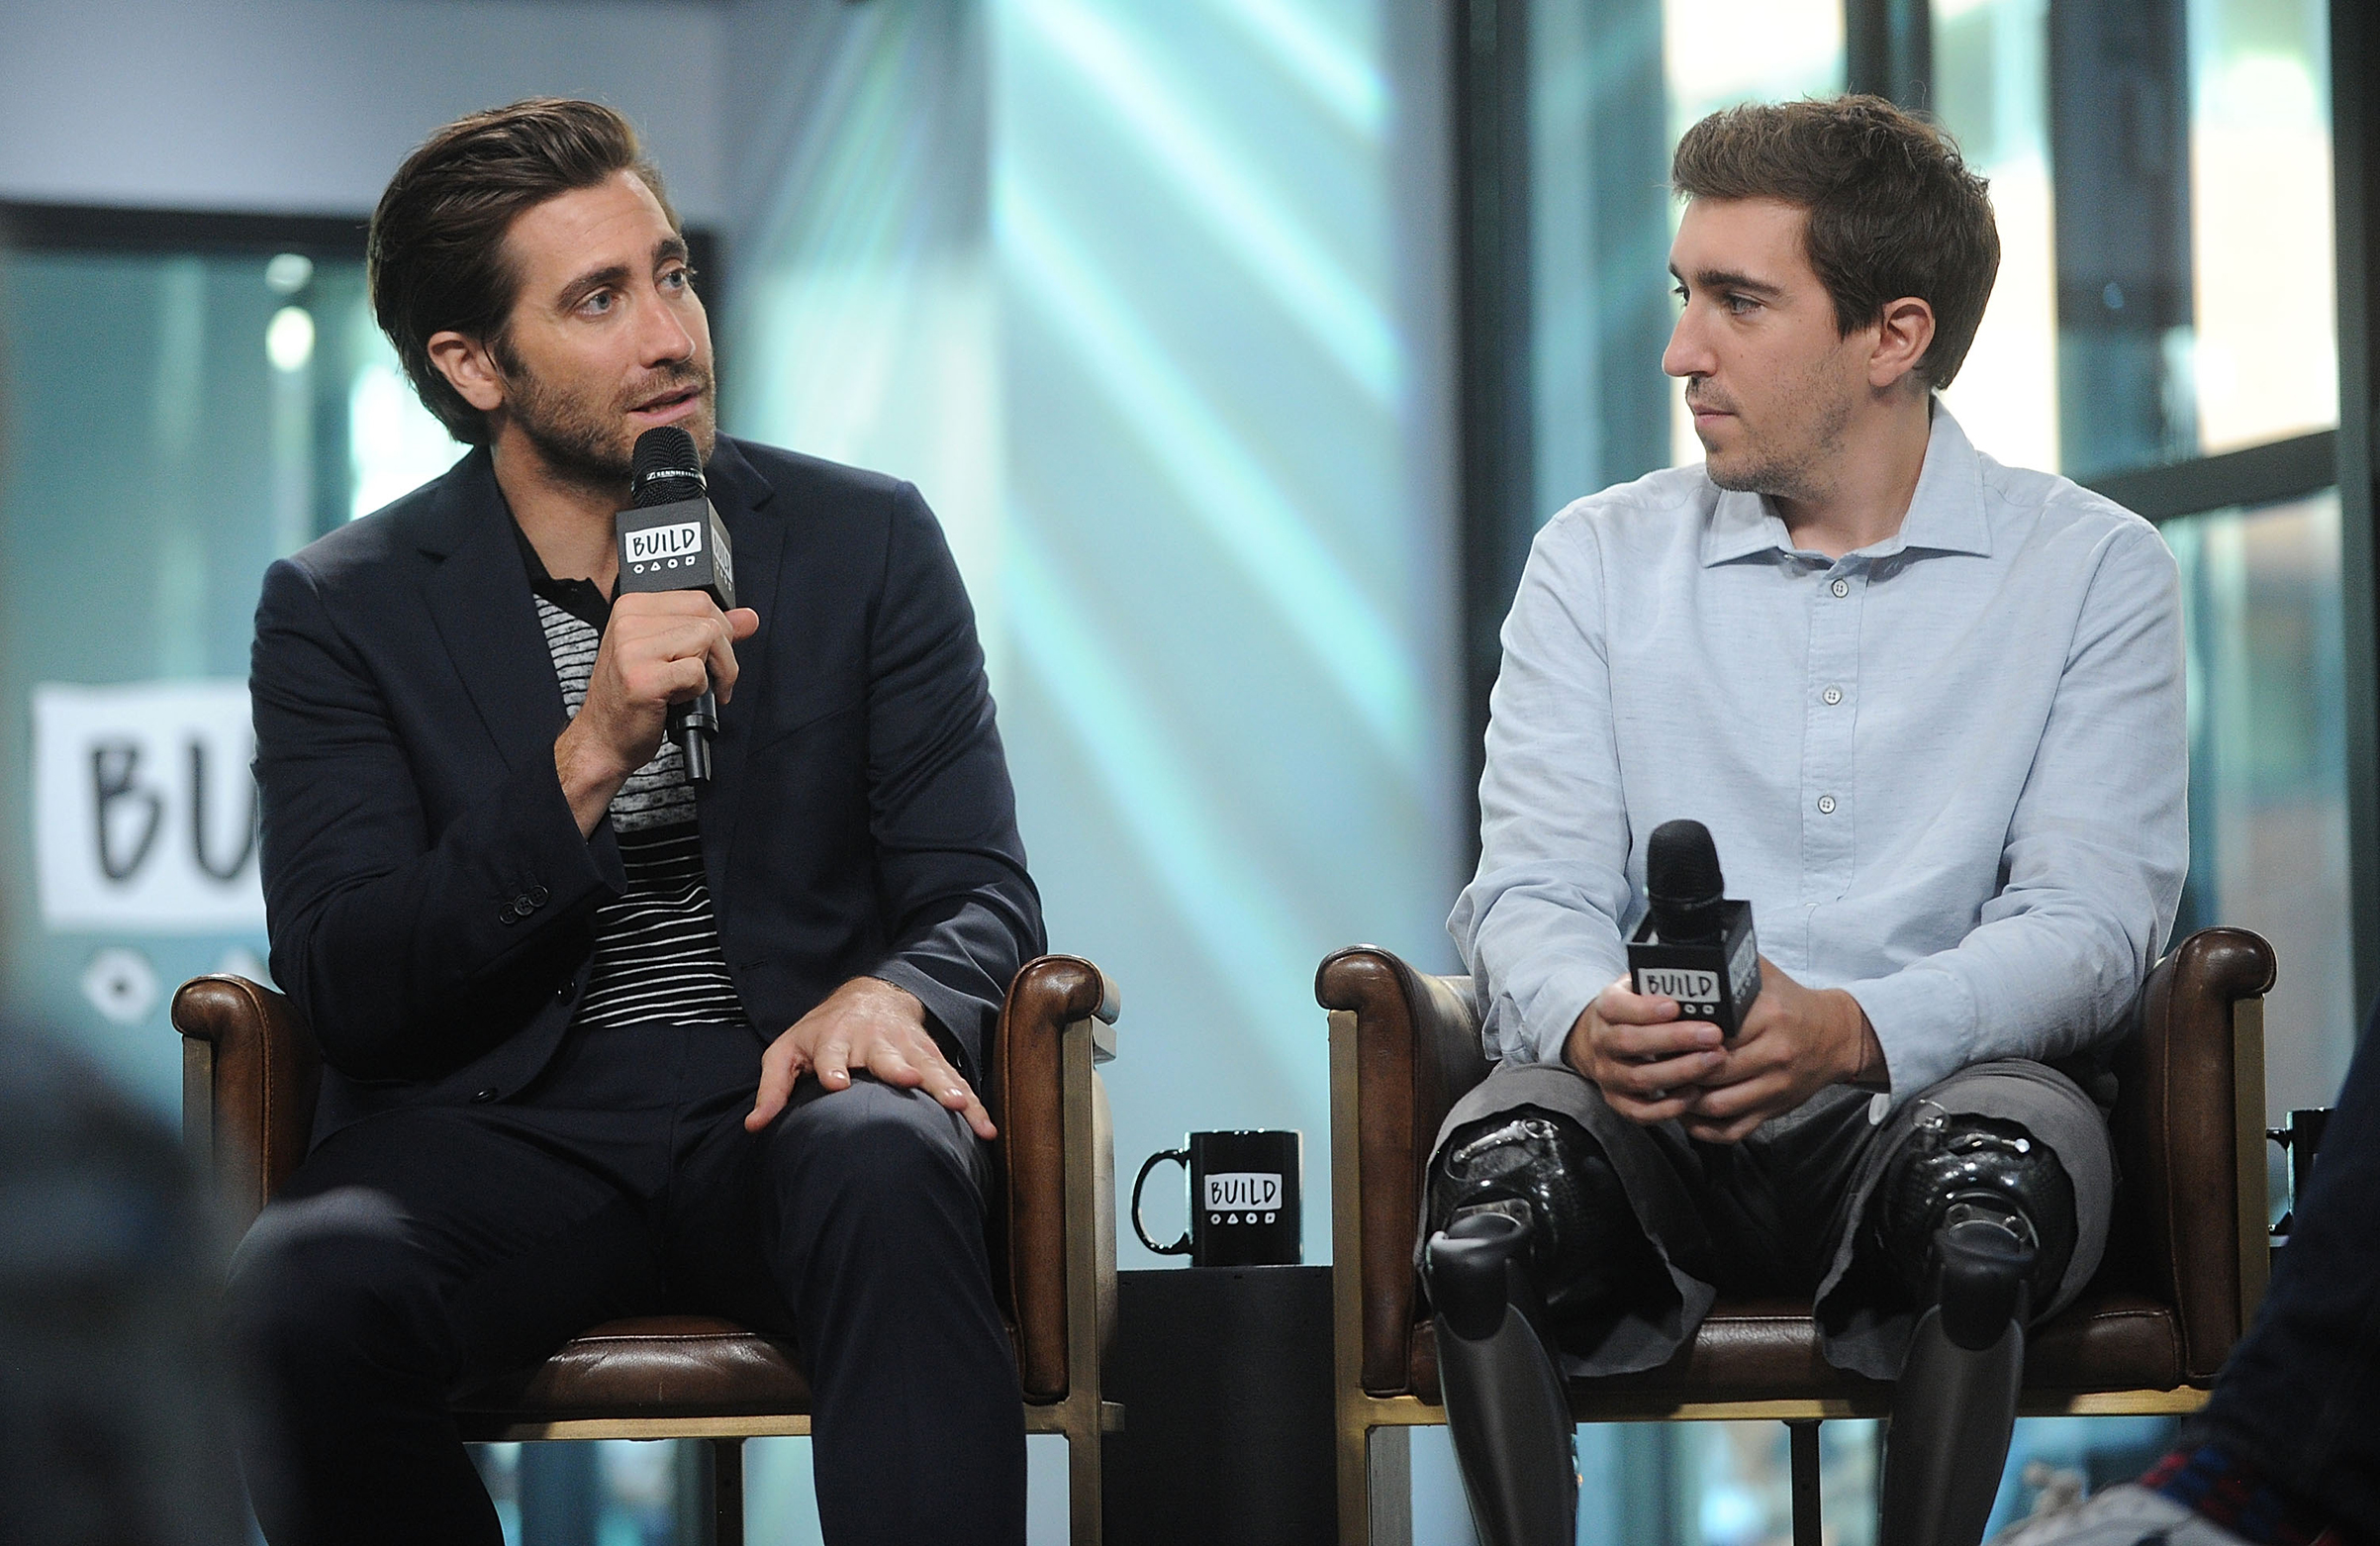 Jake Gyllenhaal, left, and Bauman attend Build Presents The Cast Of 'Stronger' at Build Studio in New York City on Sept. 15, 2017. (Brad Barket—Getty Images)